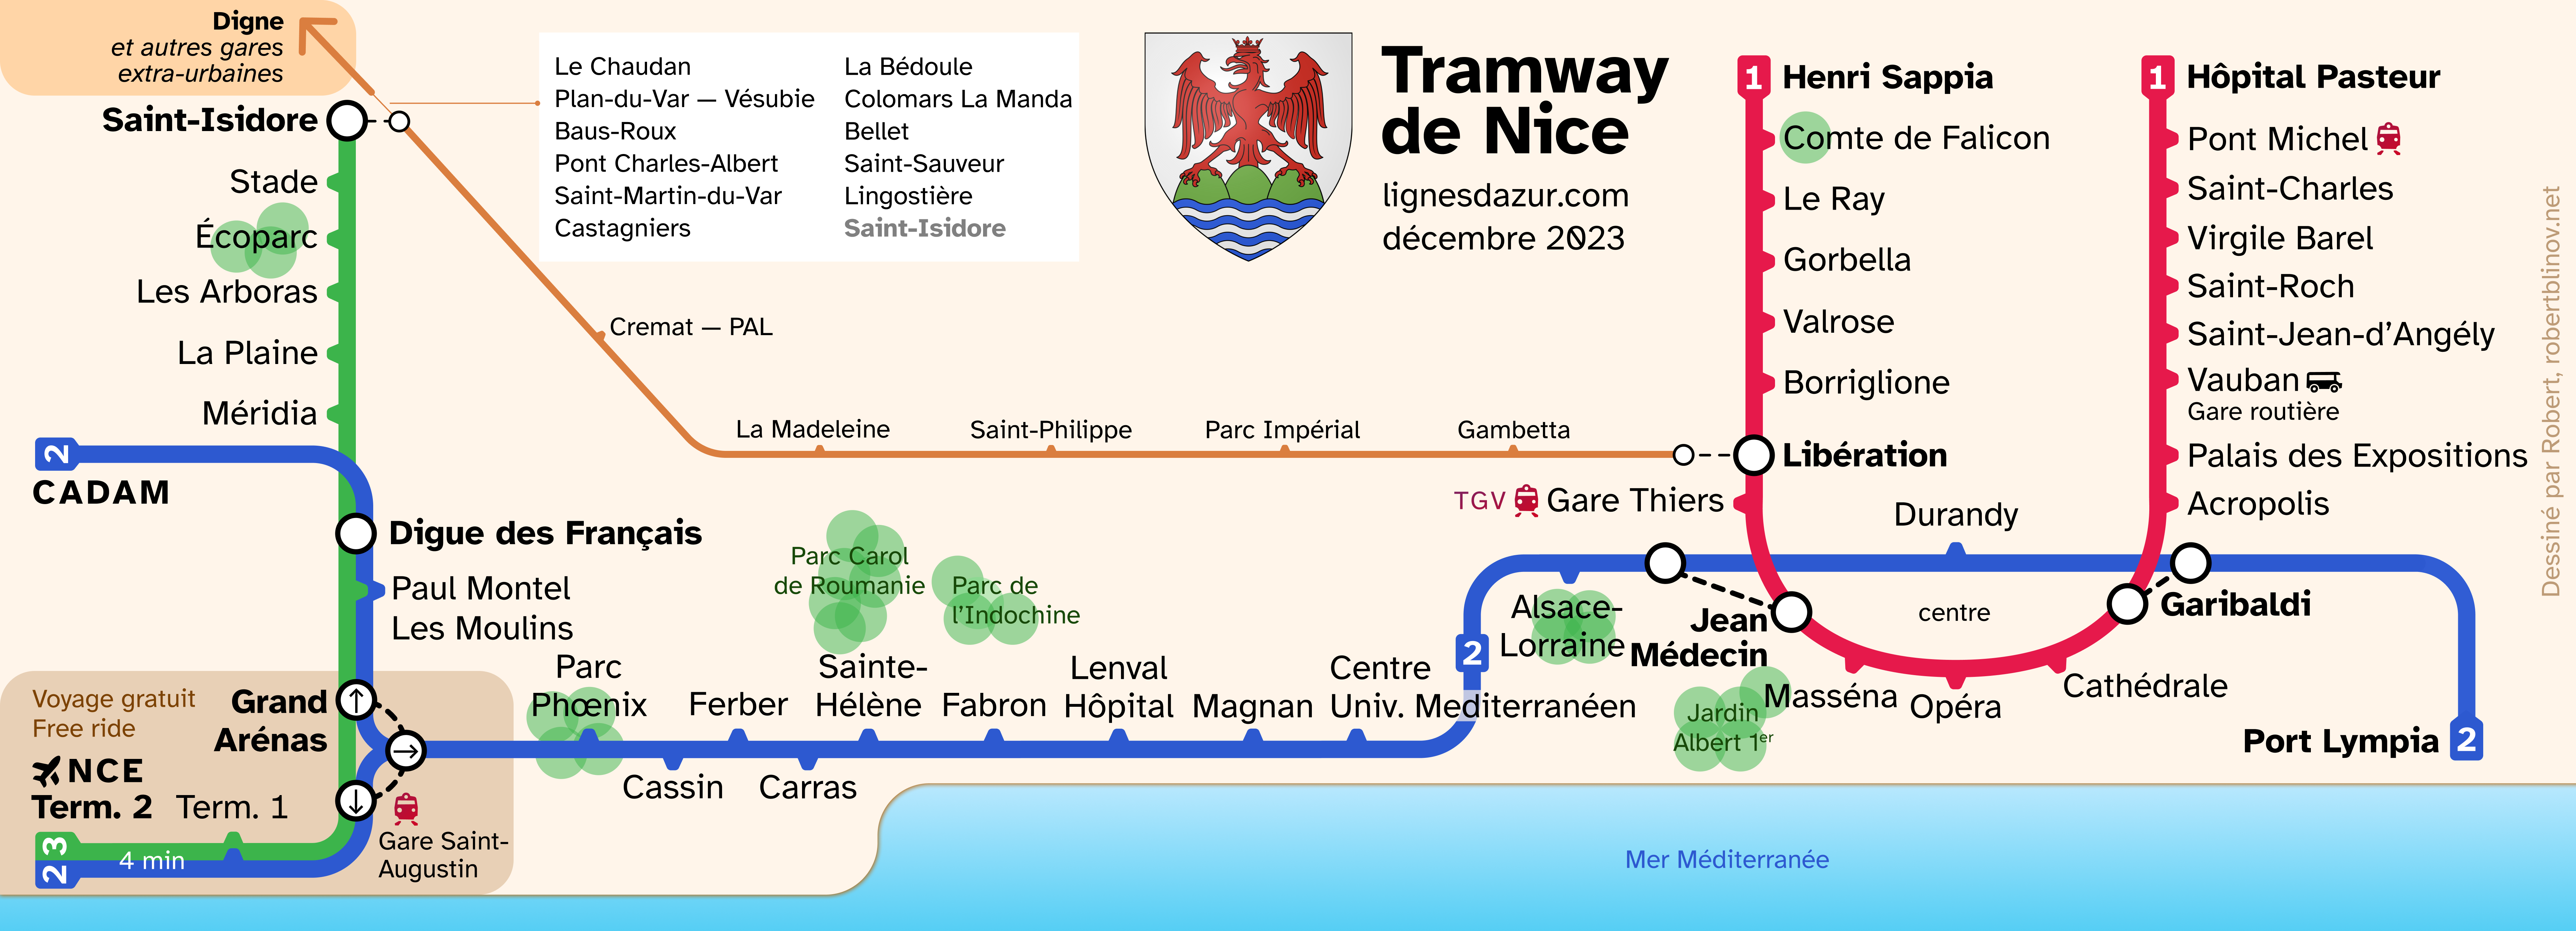 Tramway map for Nice, France